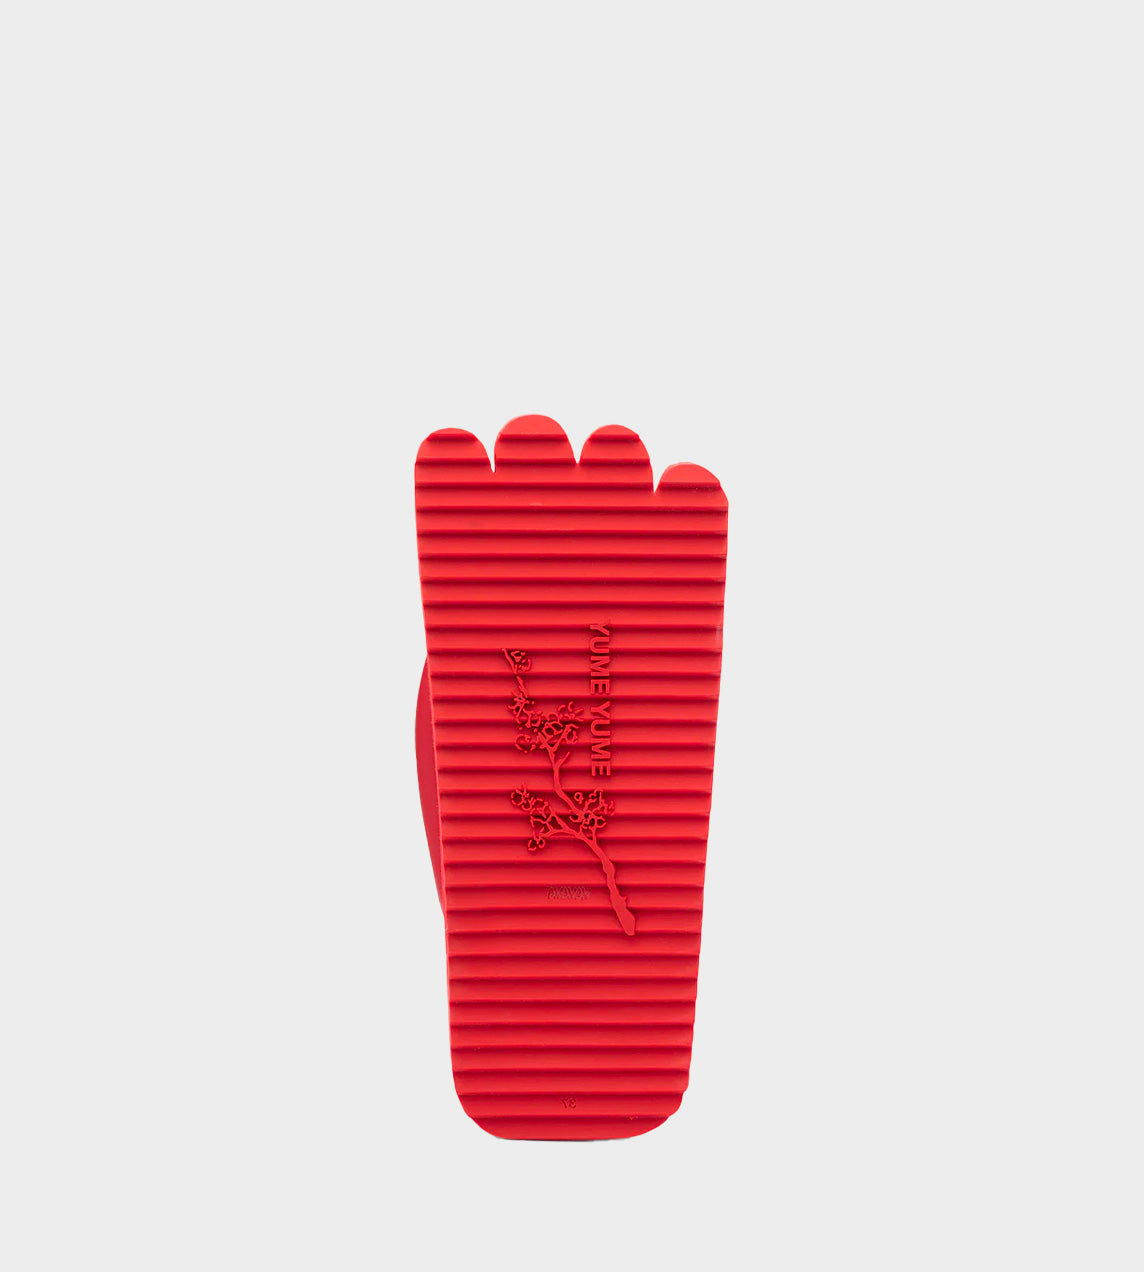 Yume Yume - Finger-flop Red